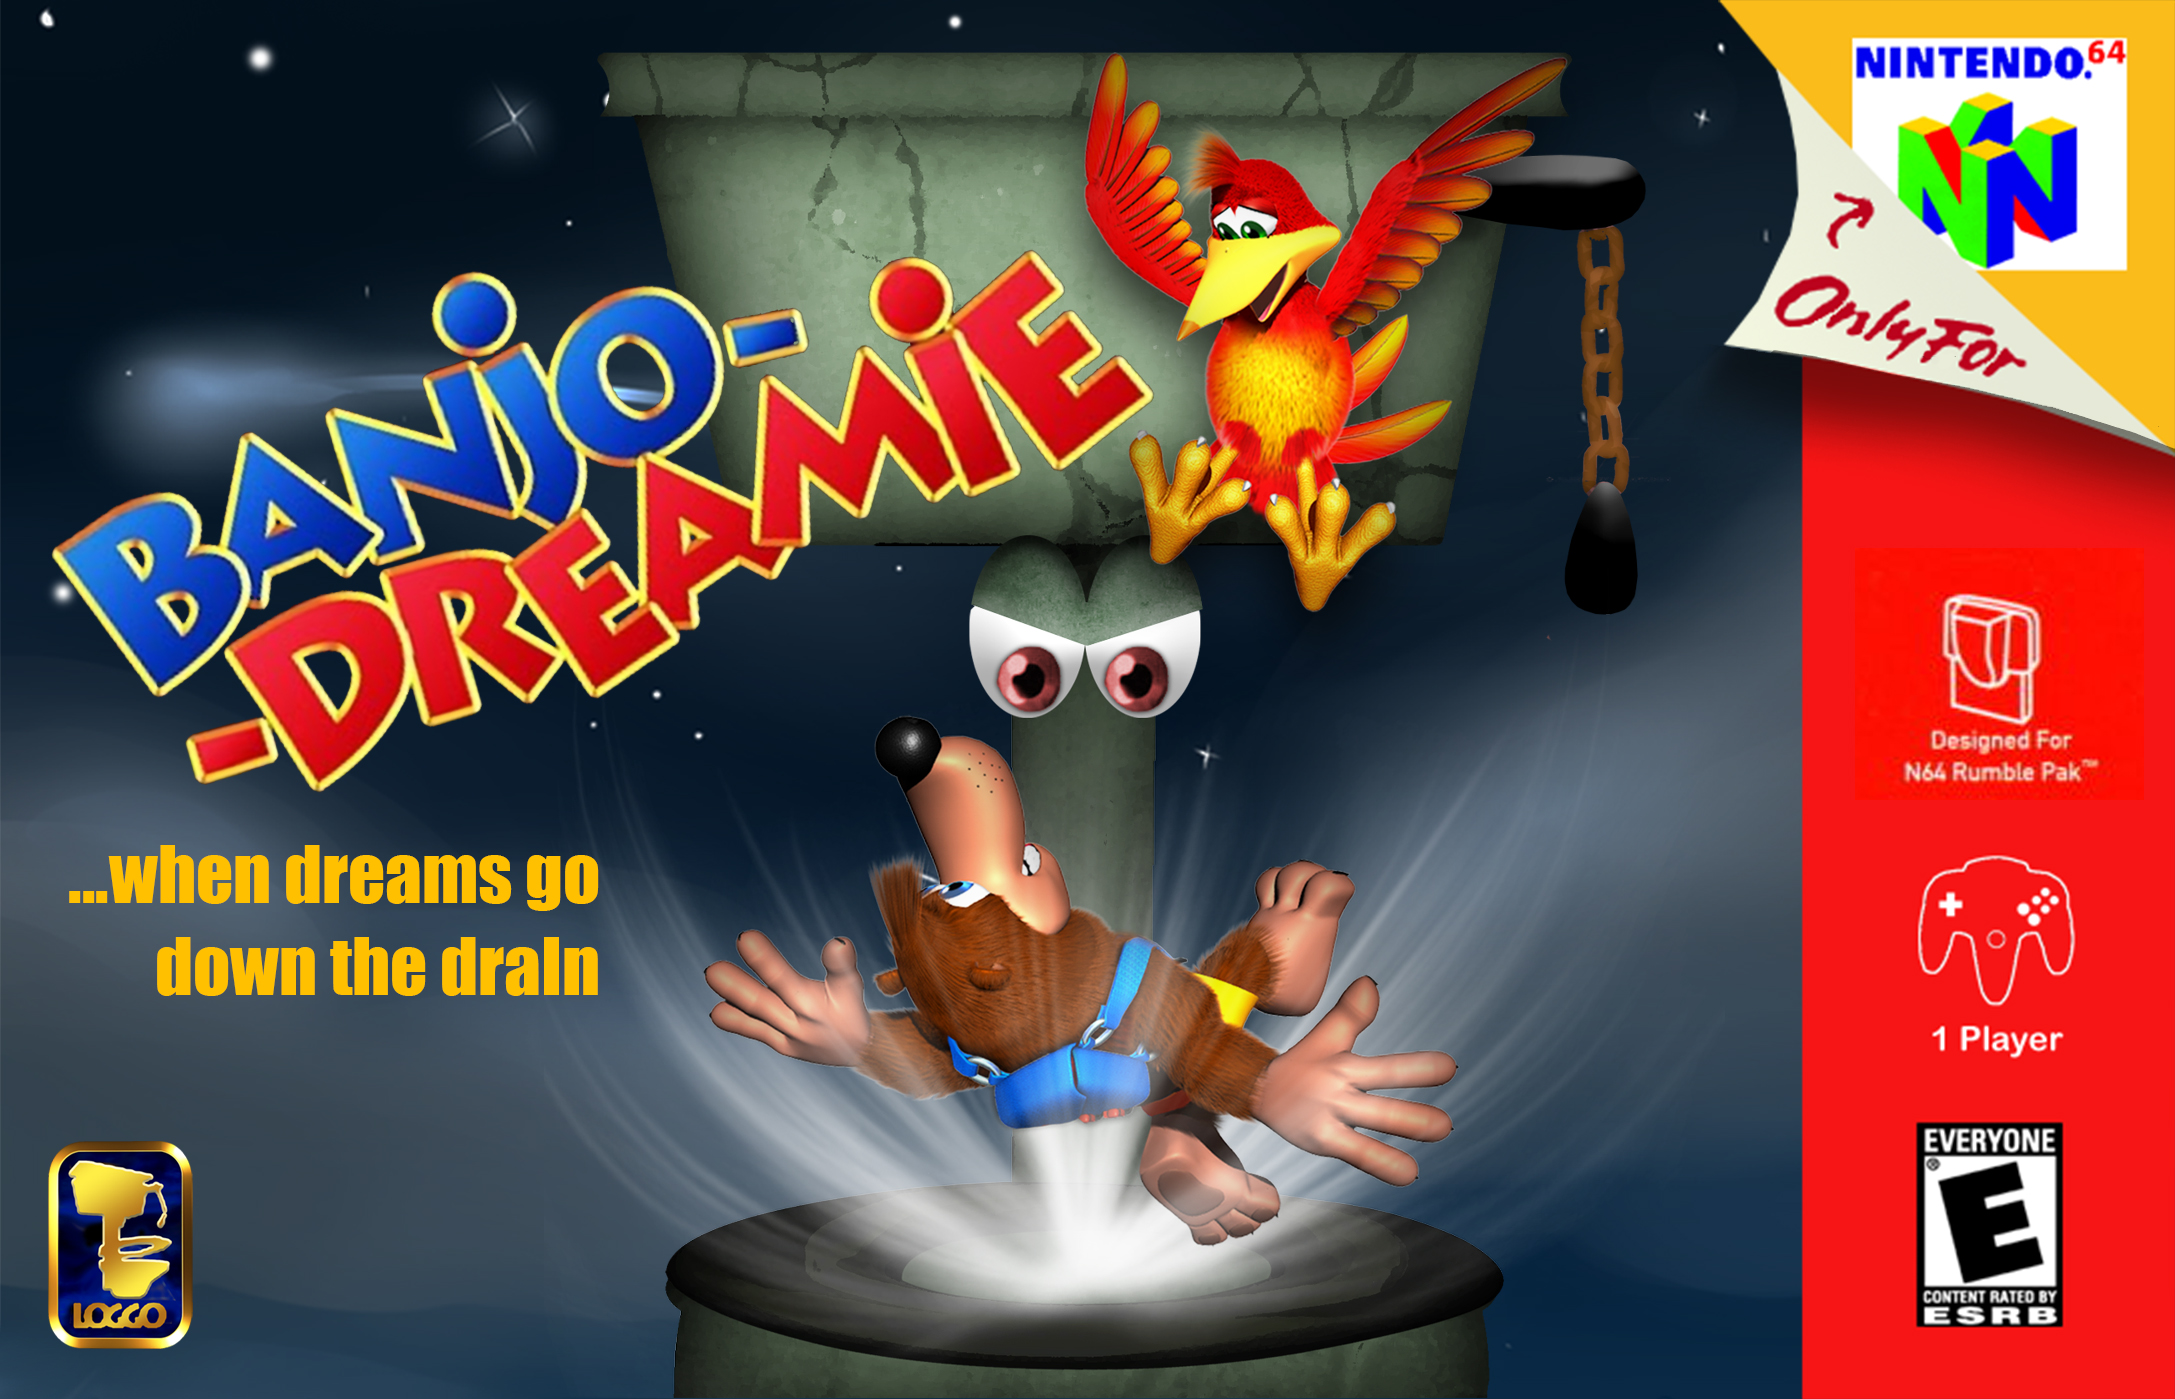 N64: Fabled Banjo-Kazooie Predecessor 'Dream 64' Is Real (& You Can See It)